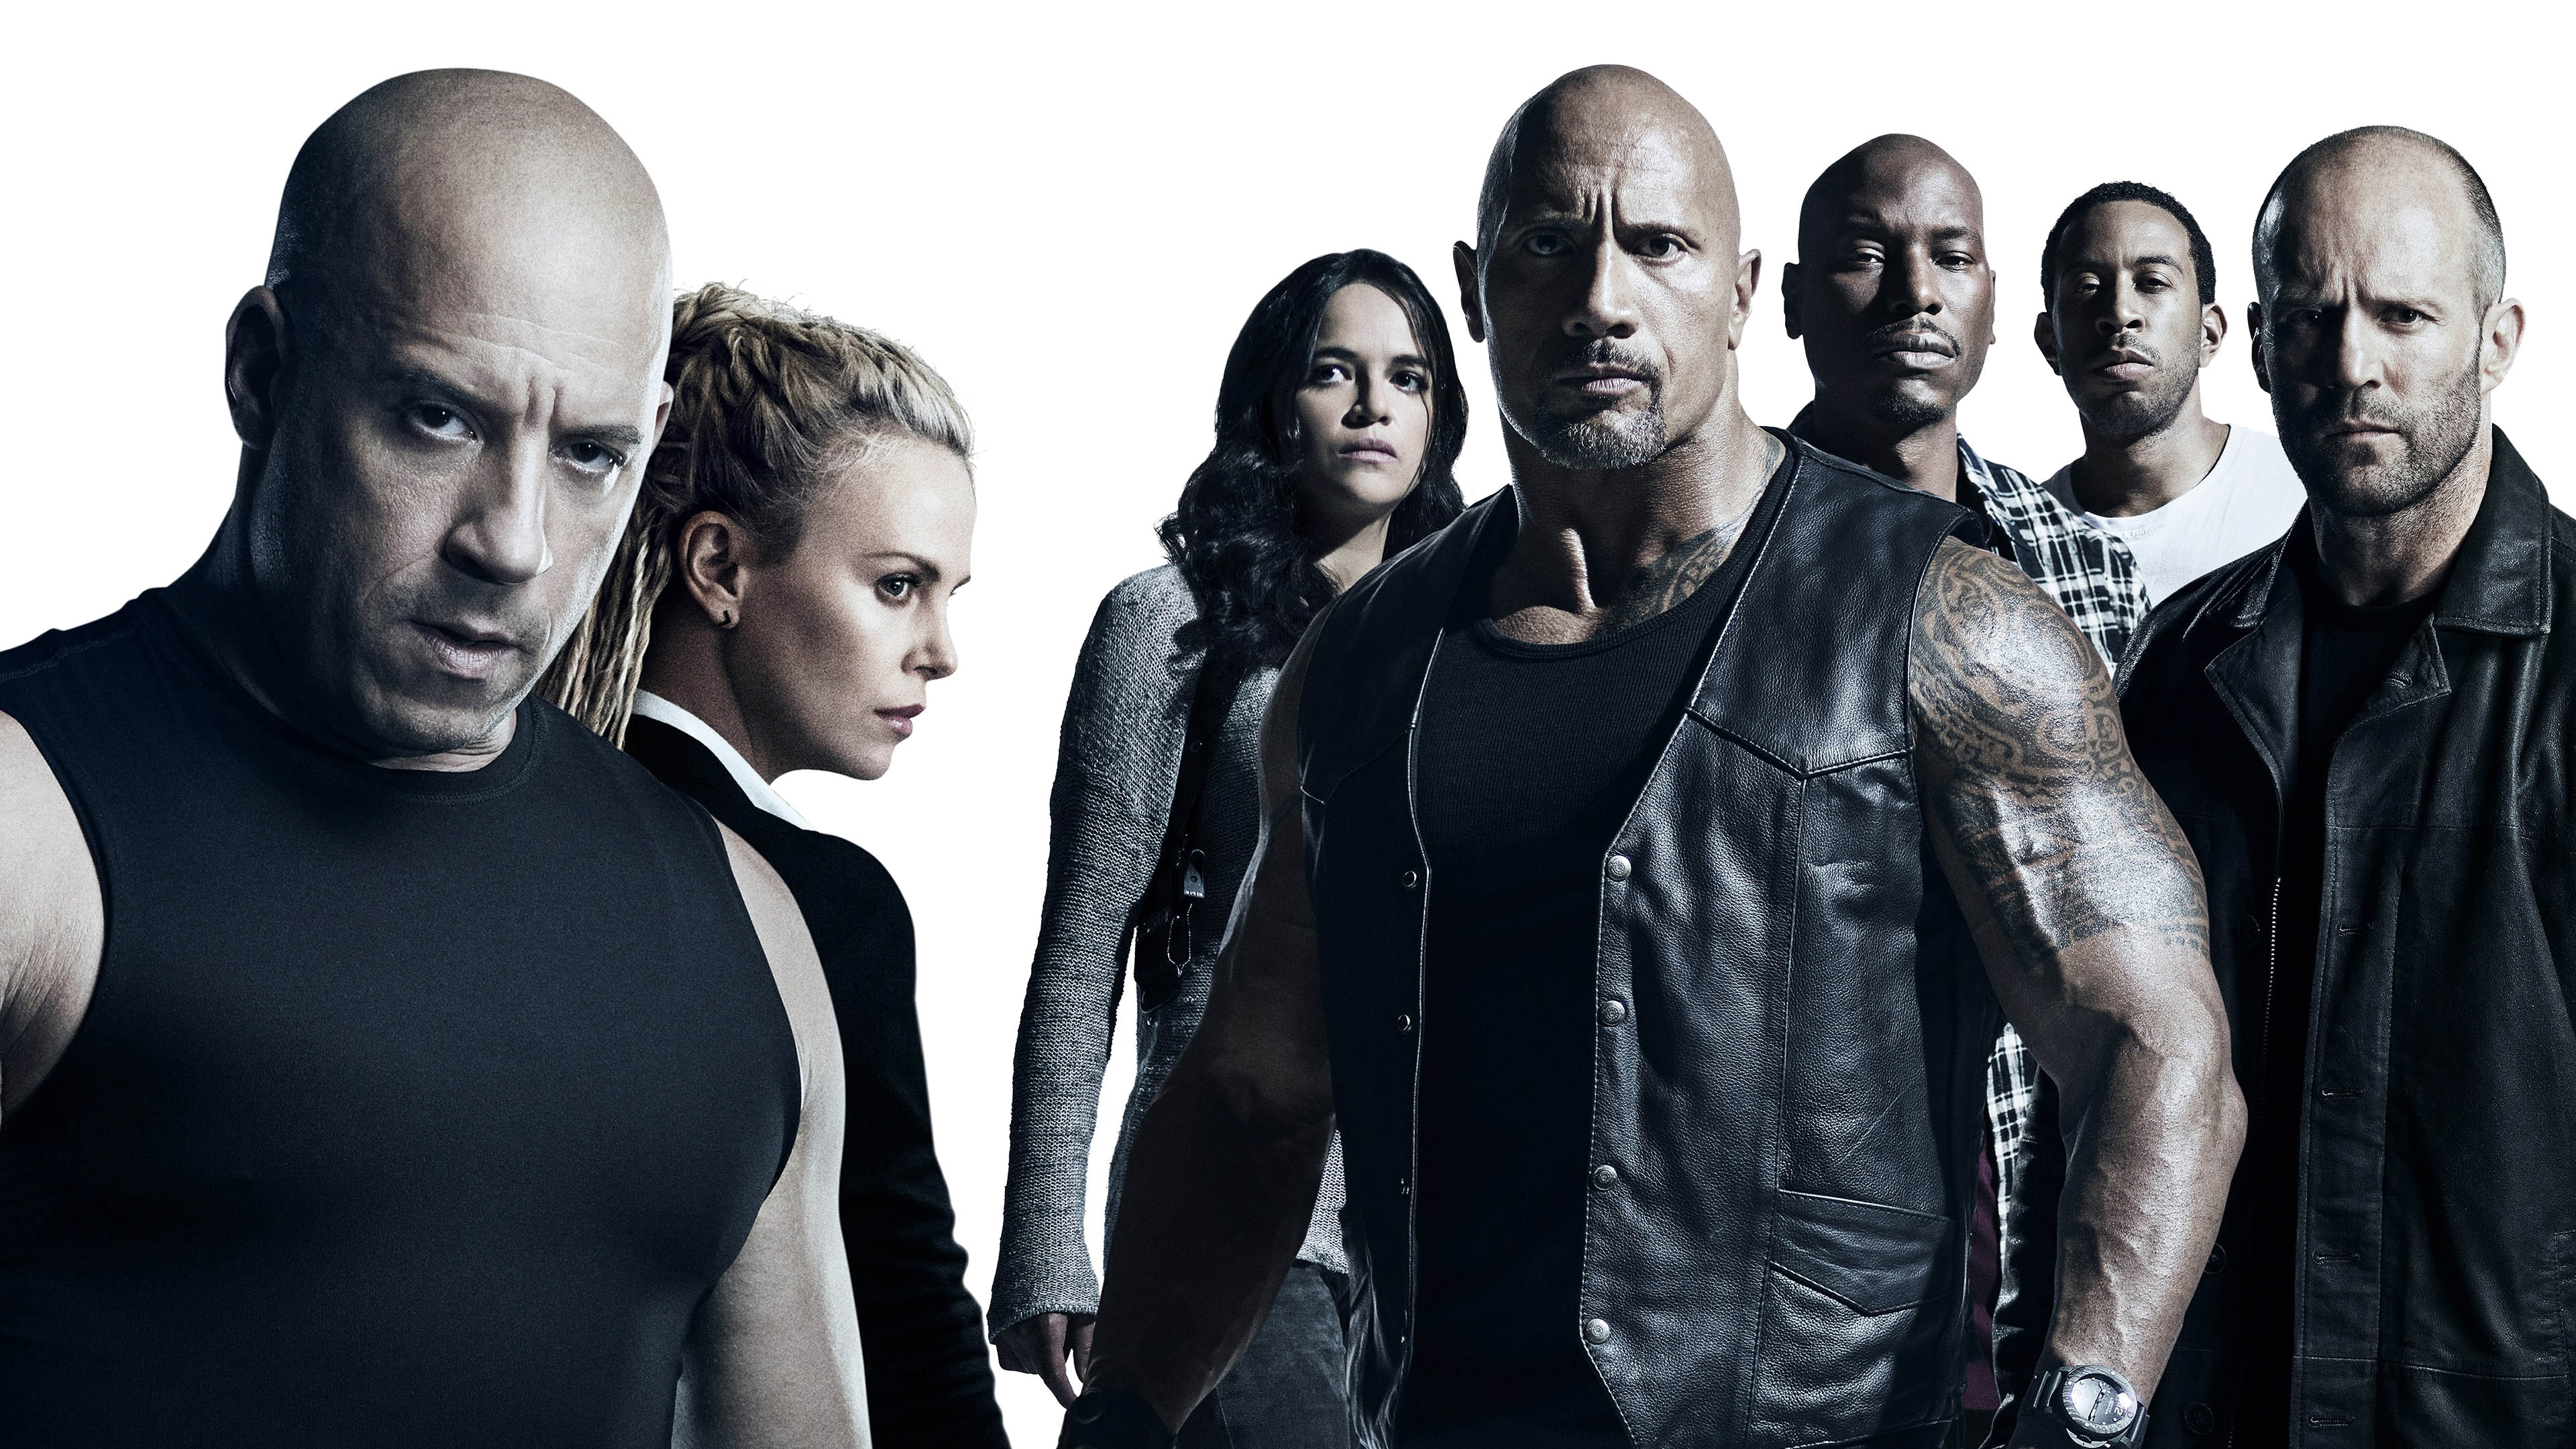 Cast Fast Furious 8 Wallpaper CoolWallpaper.site